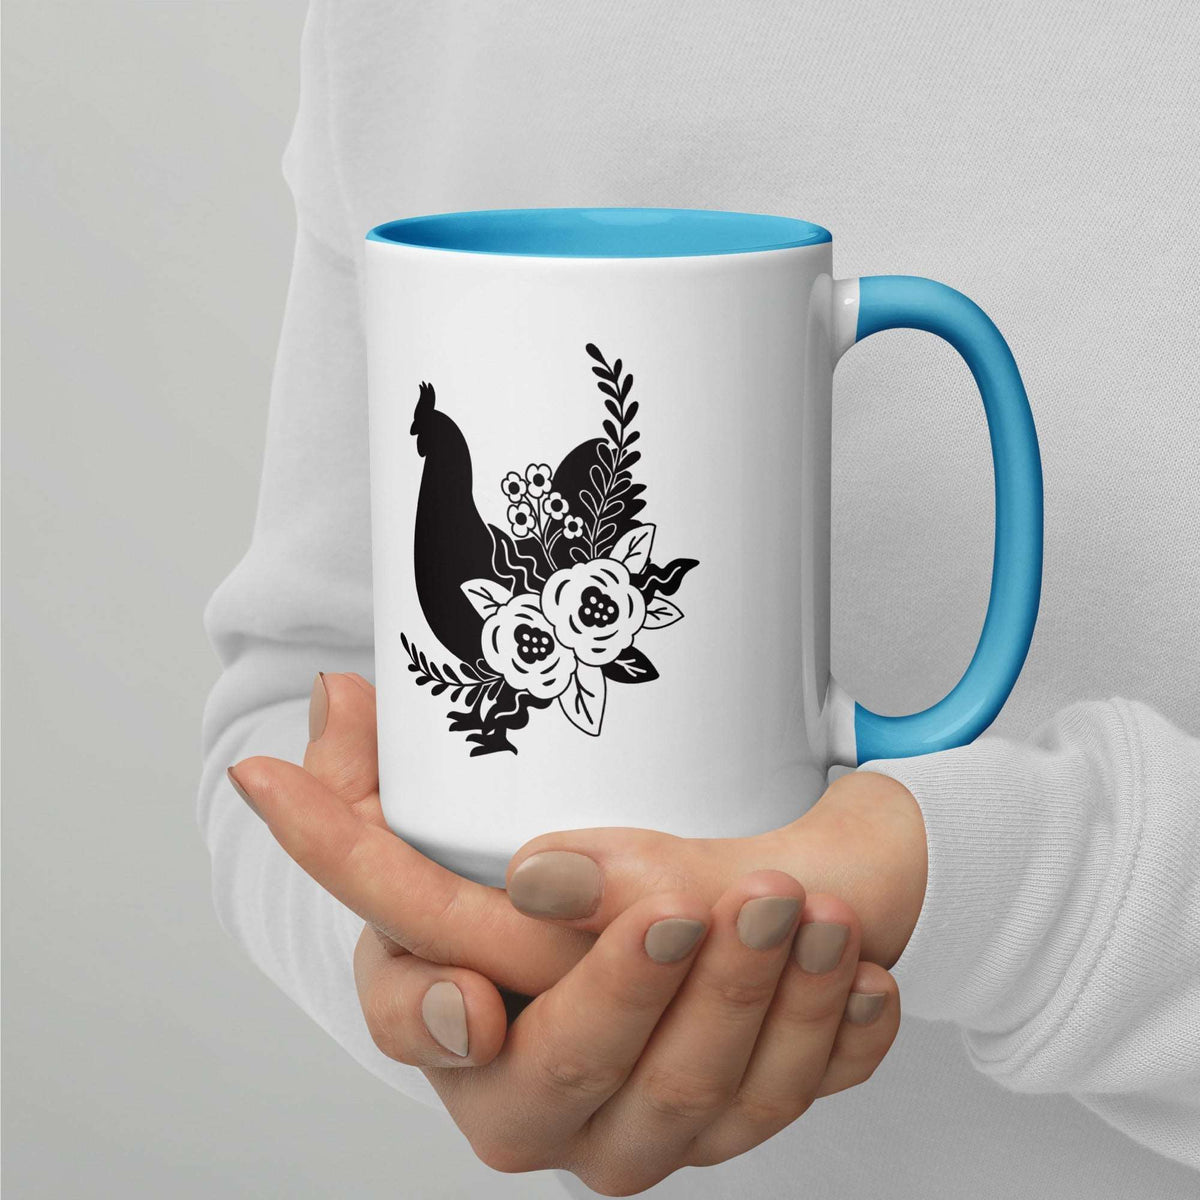 Floral Chicken Mug - Cluck It All Farms